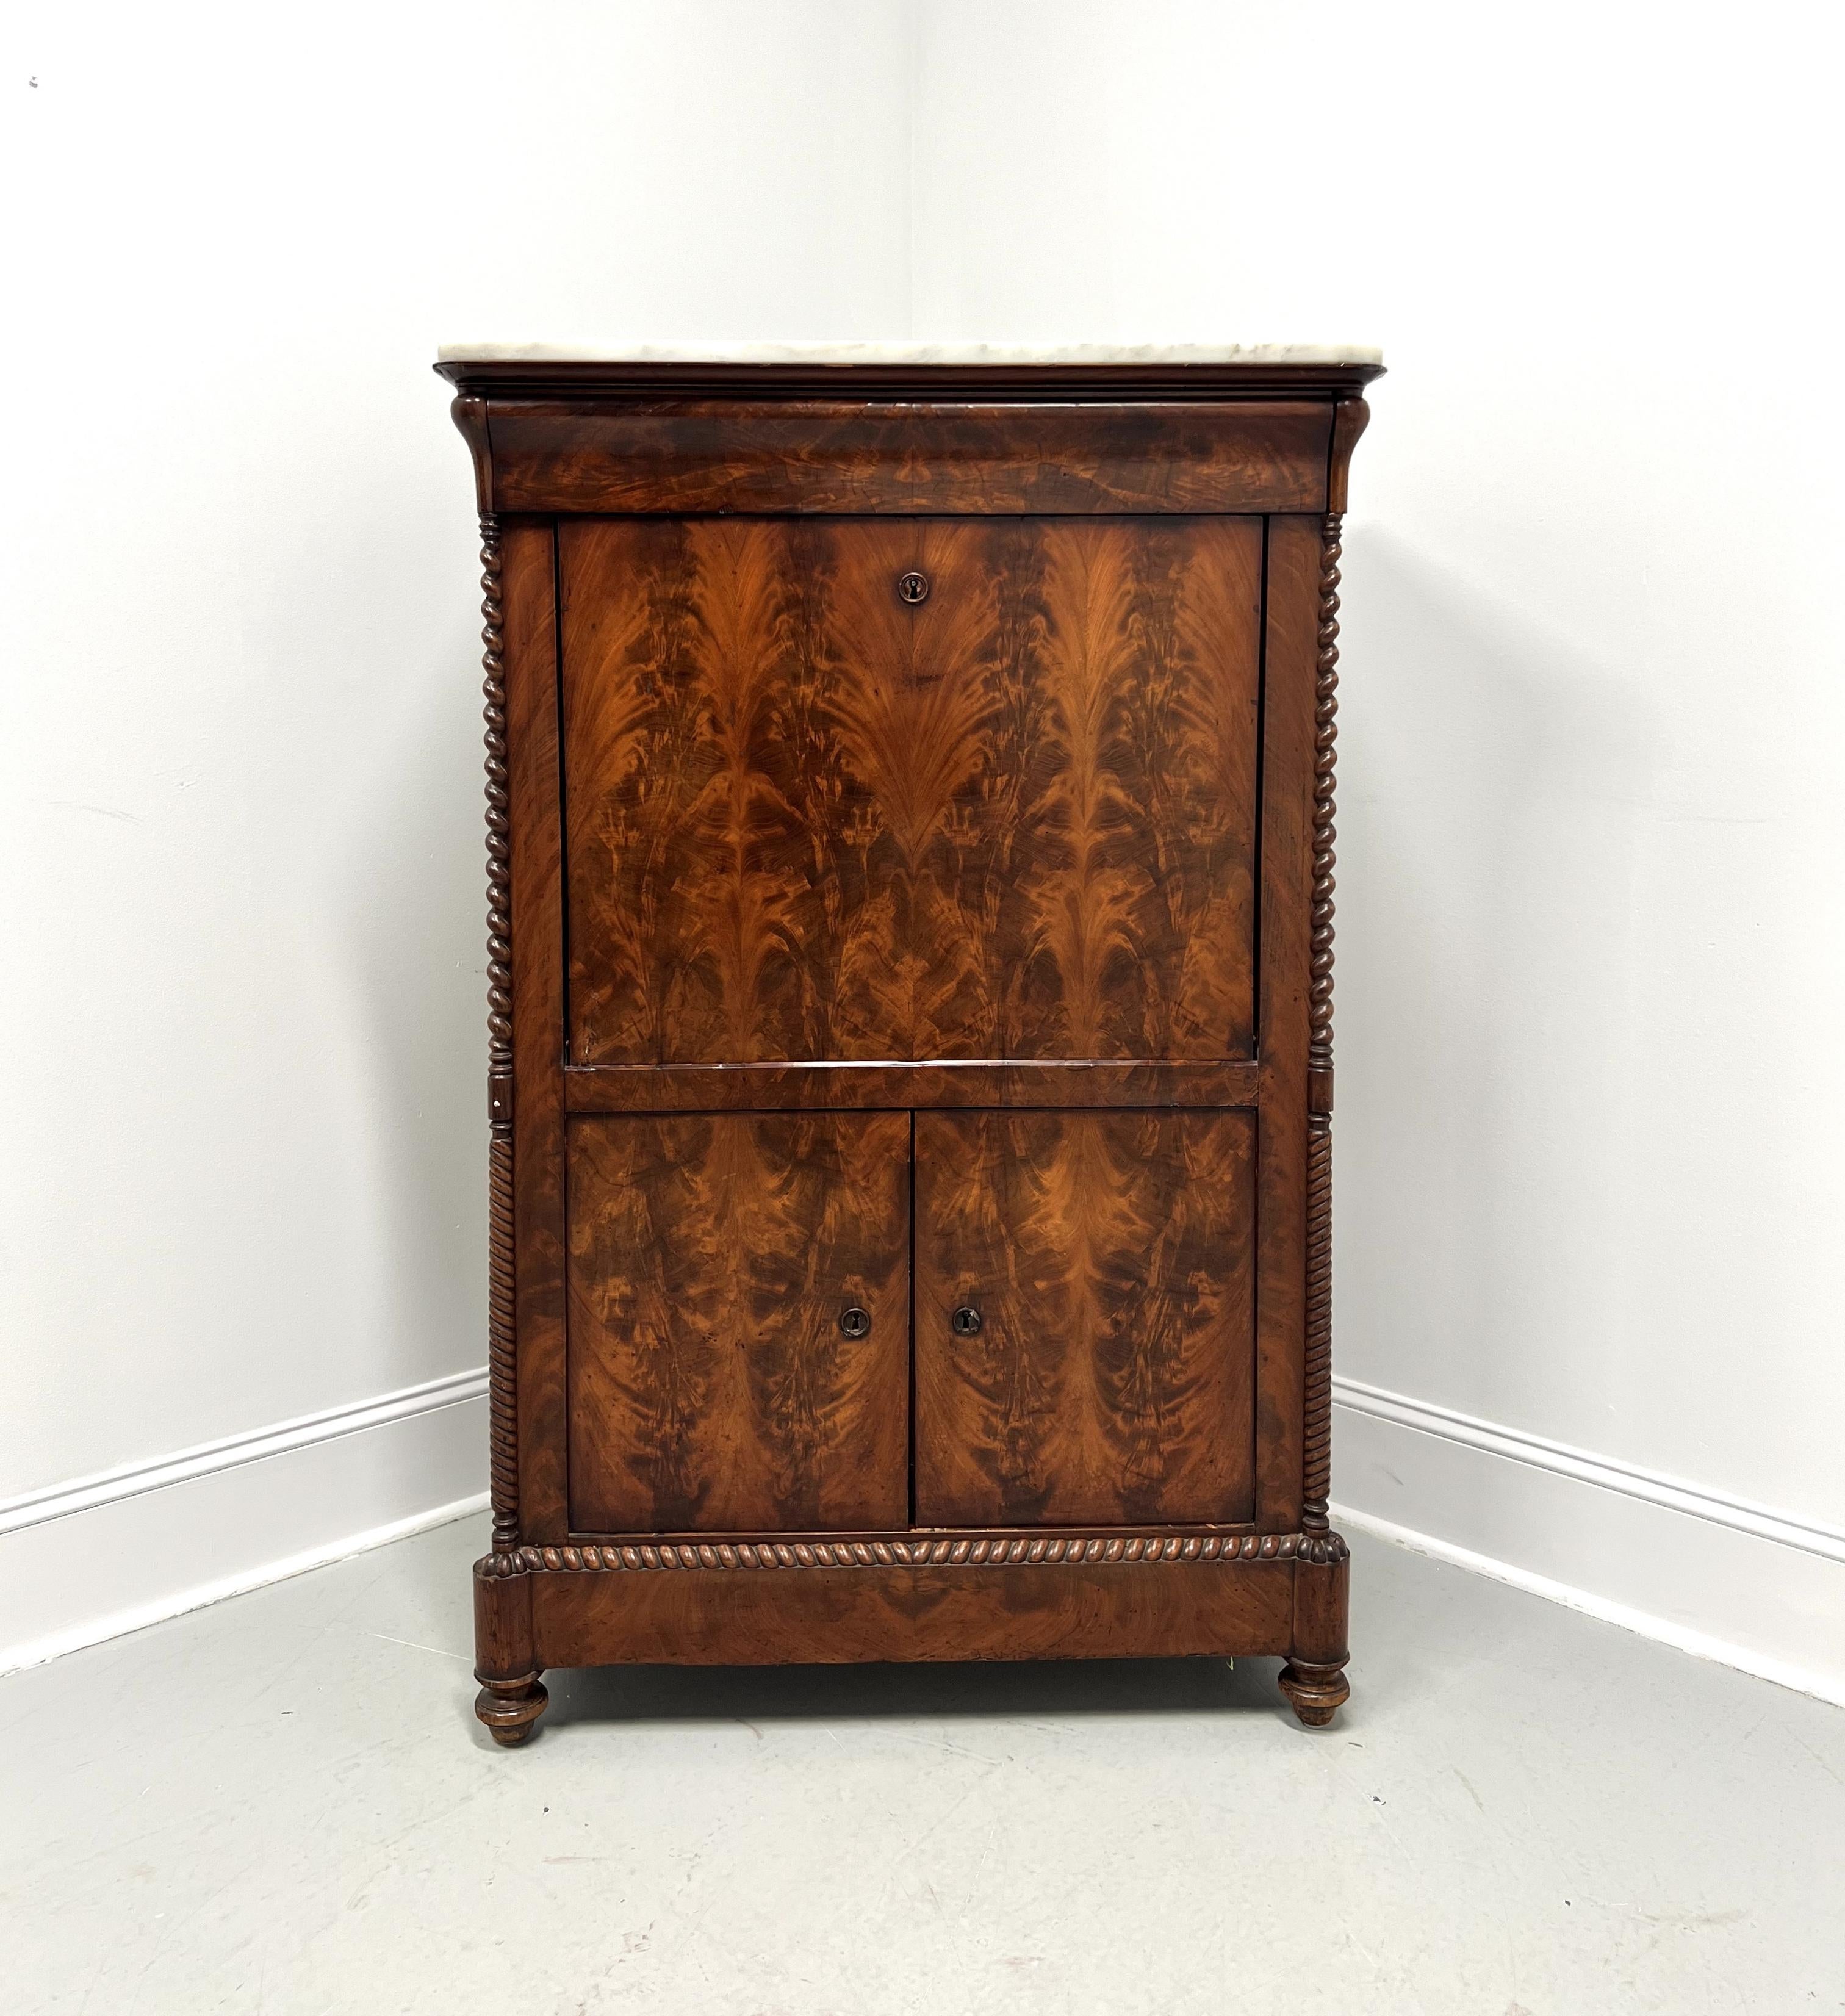 An antique Biedermeier style abatante secretary desk, unbranded. Mahogany with flame mahogany veneers, decorative overhang to top, later added white marble top, brass keyhole escutcheons to doors opening, carved rope twist detailing to front sides &